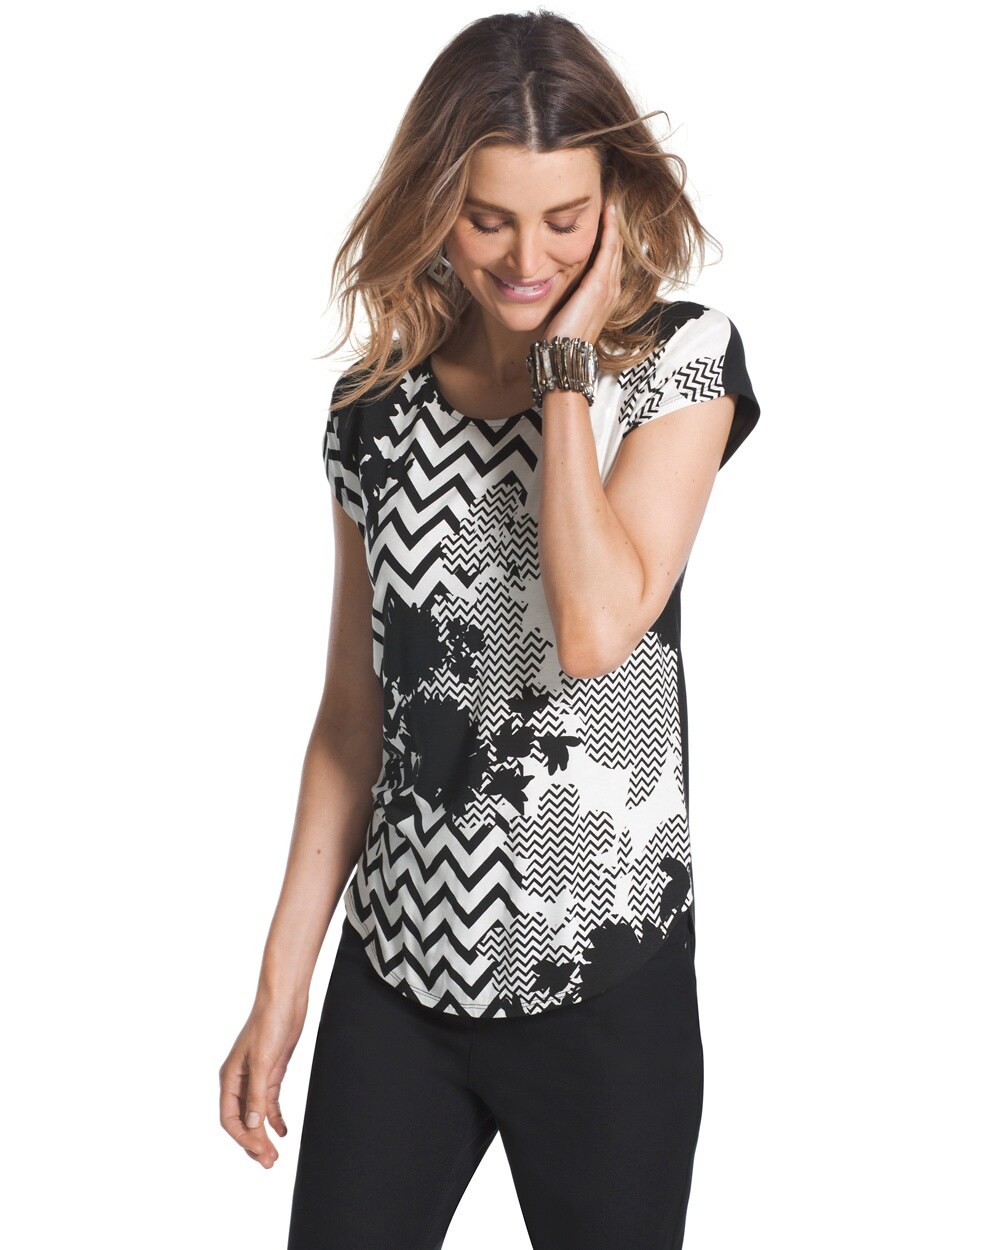 Eve Abstract Black-and-White Top